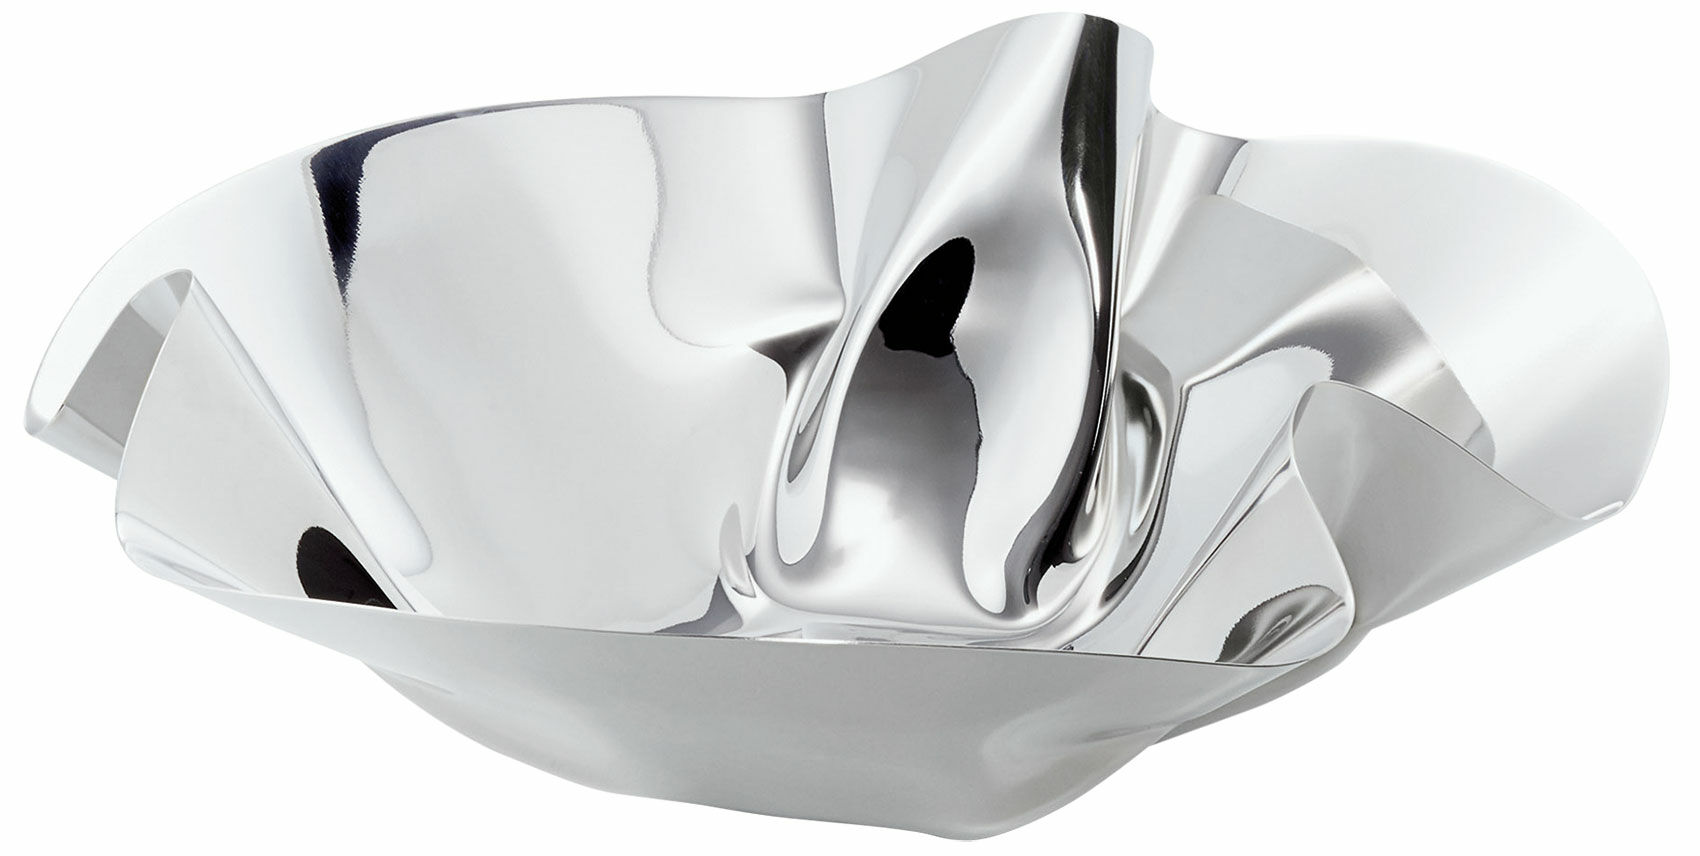 Bowl "Margarethe", stainless steel by Philippi